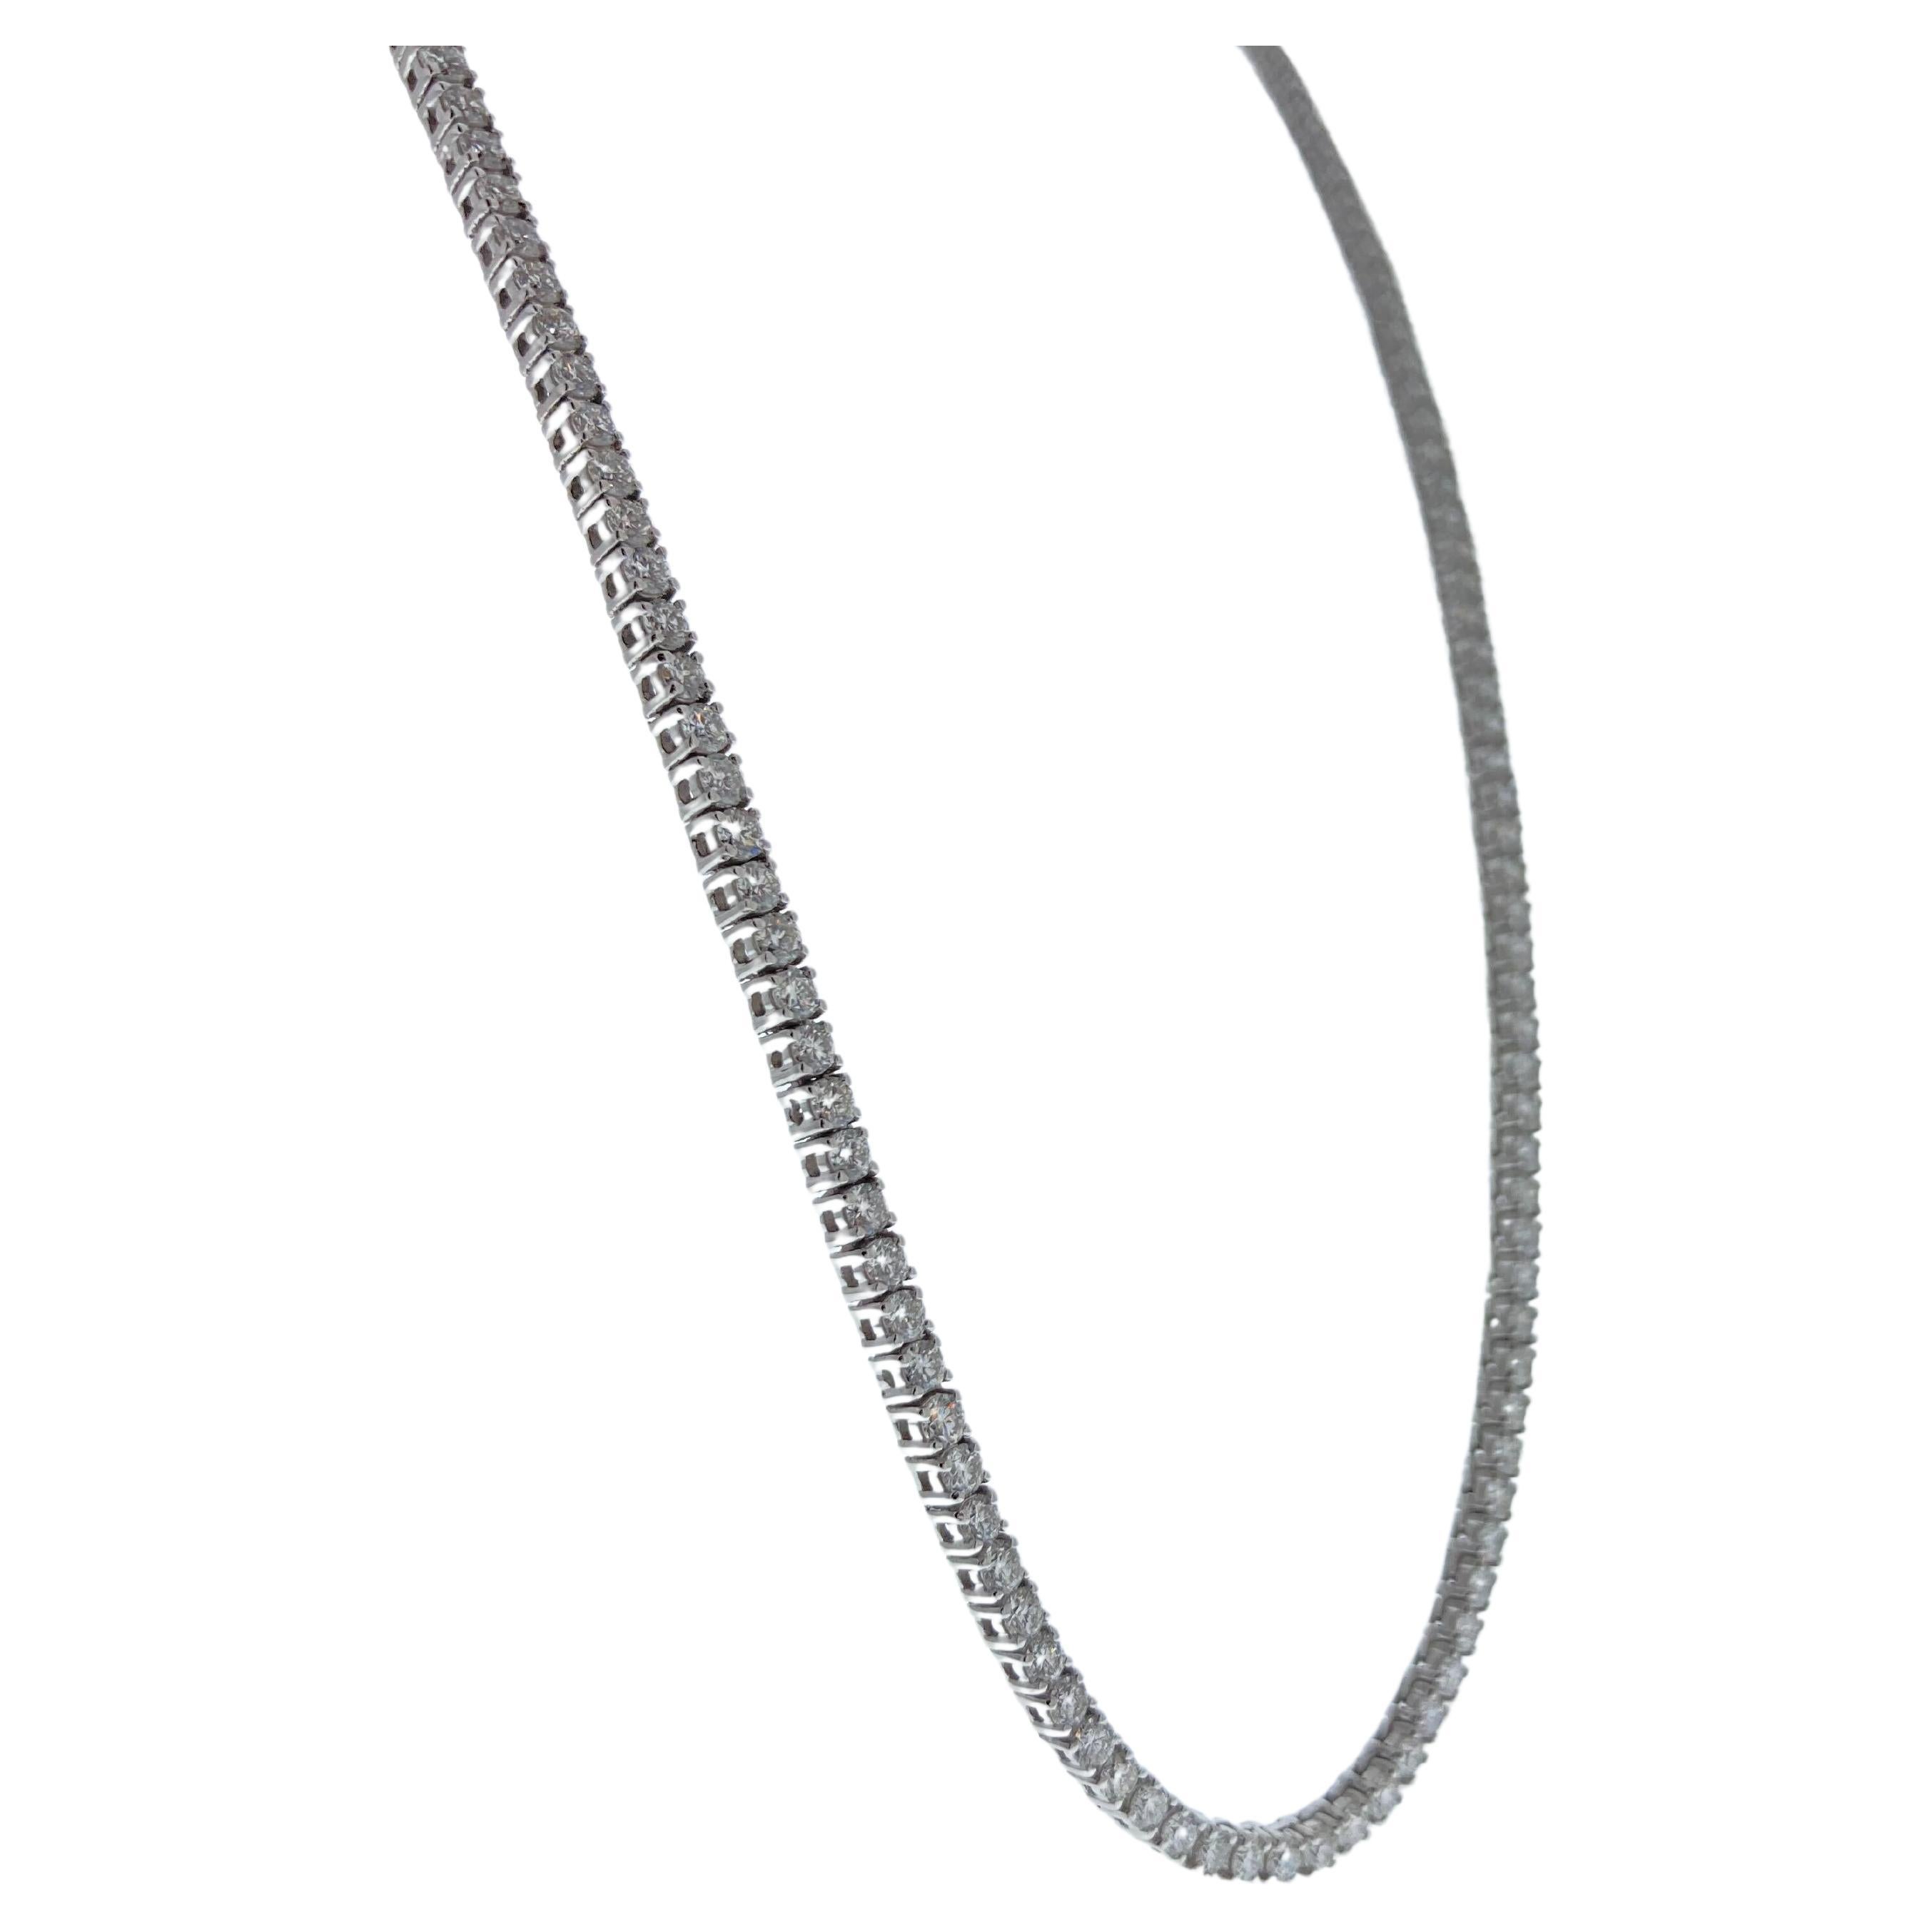 7.00 Carat Round Diamond Tennis Necklaces In 14k White Gold For Sale